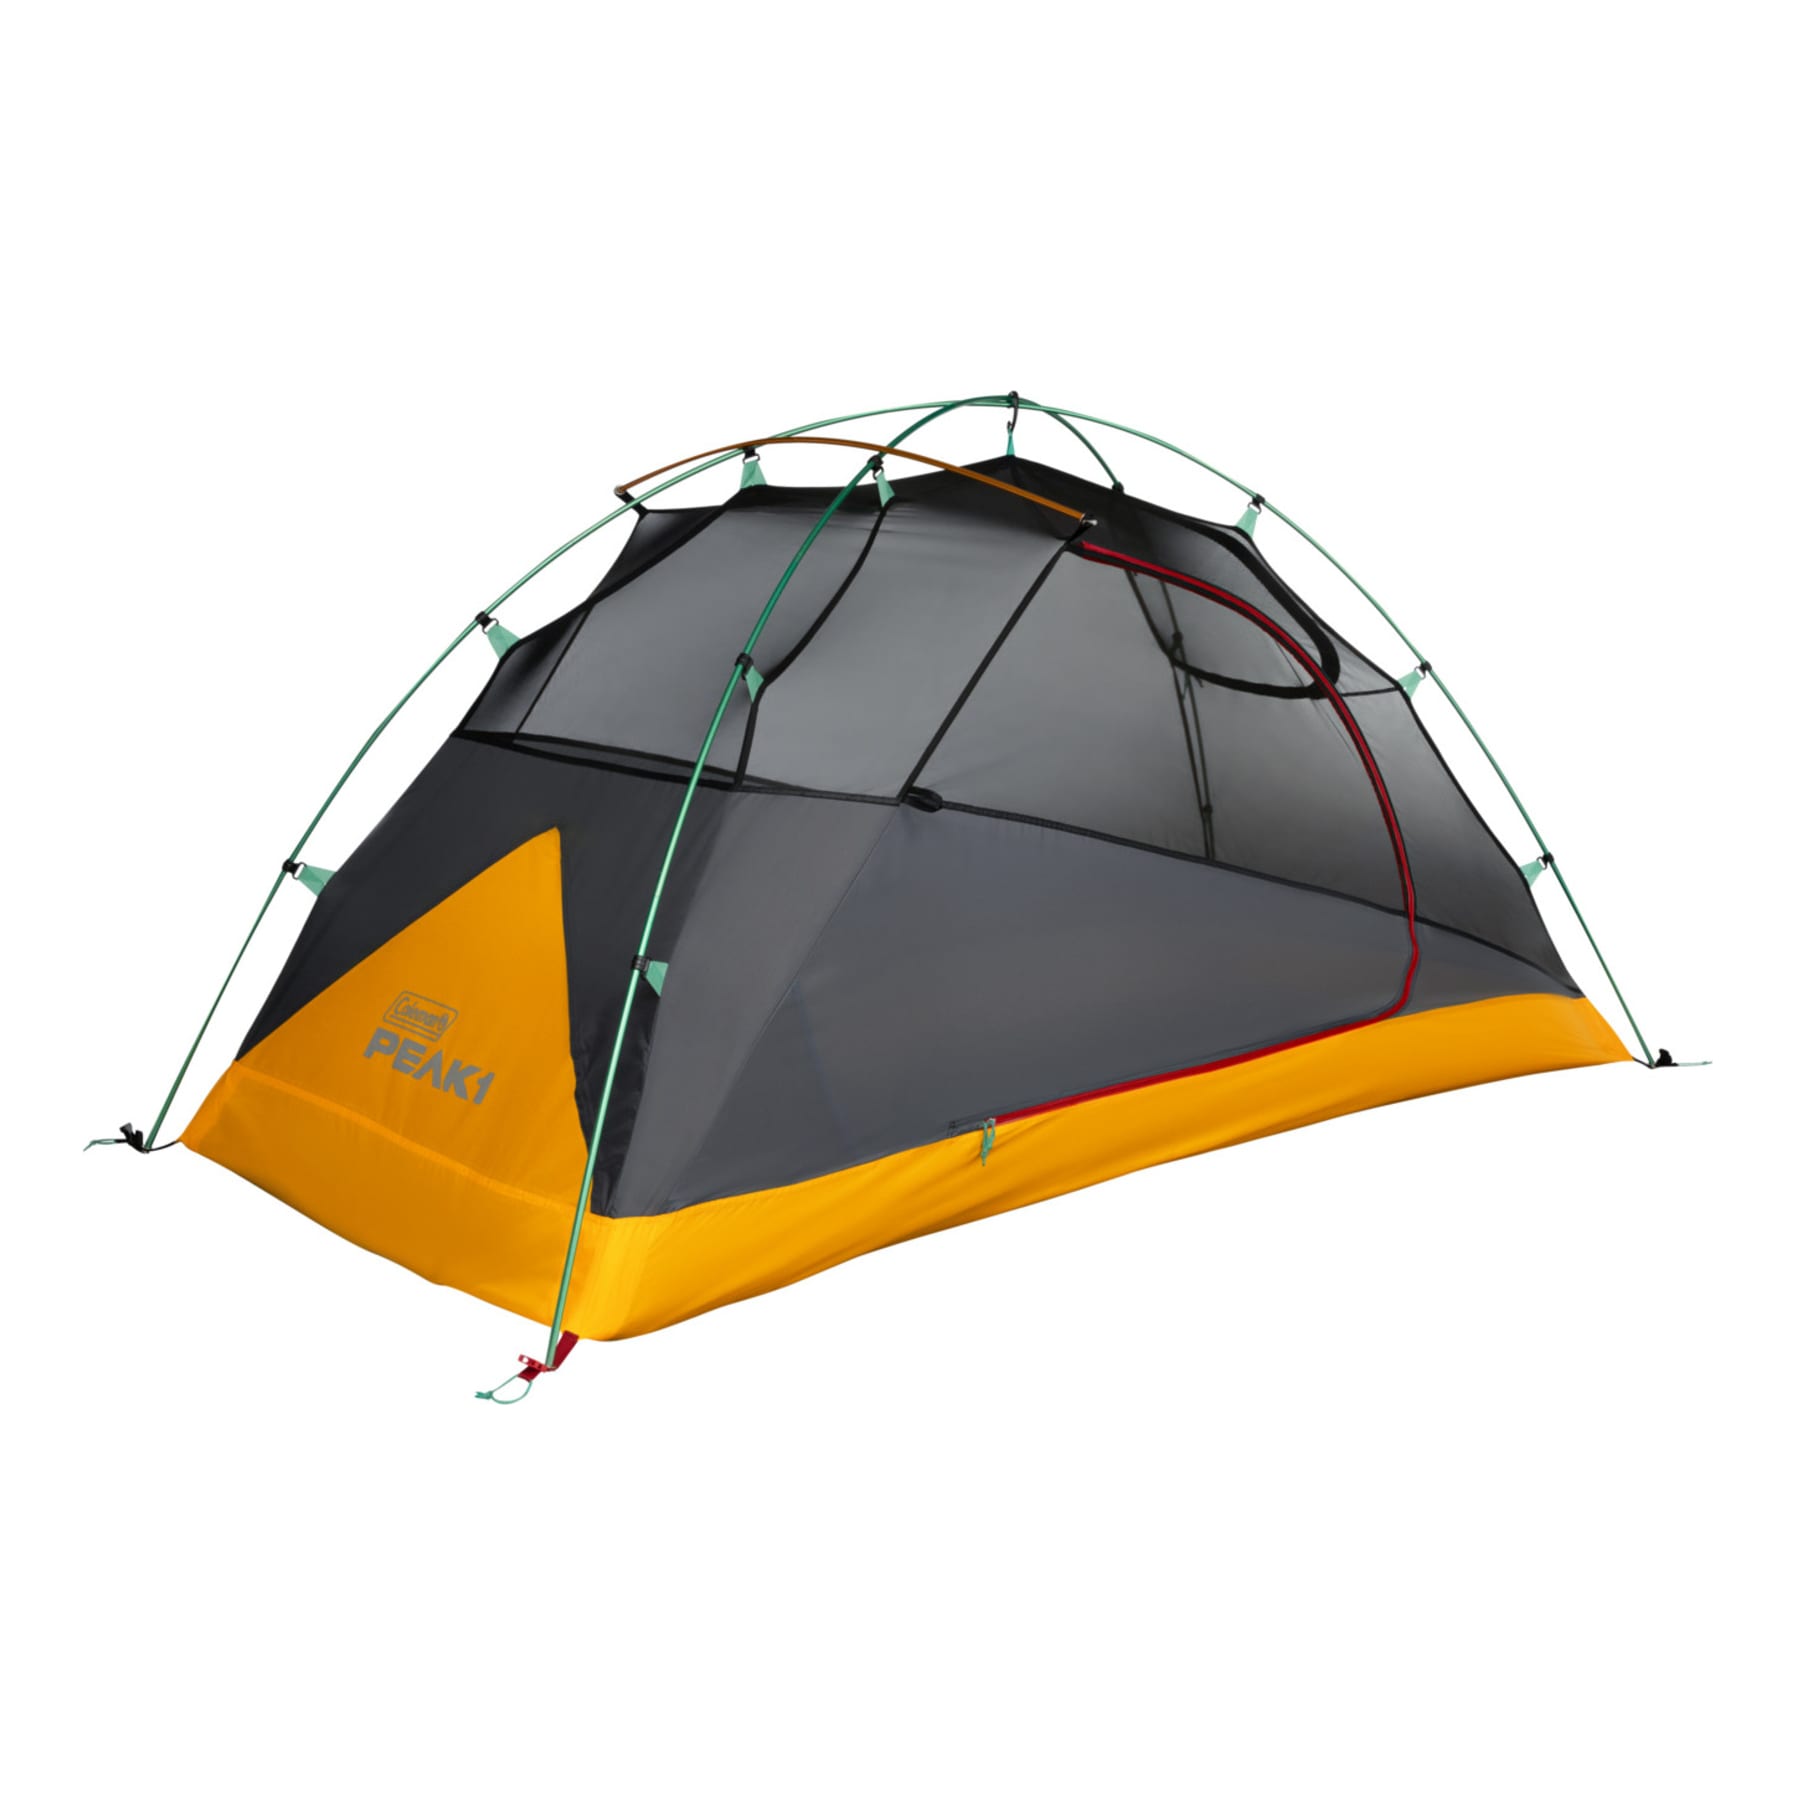 PEAK1™ 1-Person Backpacking Tent